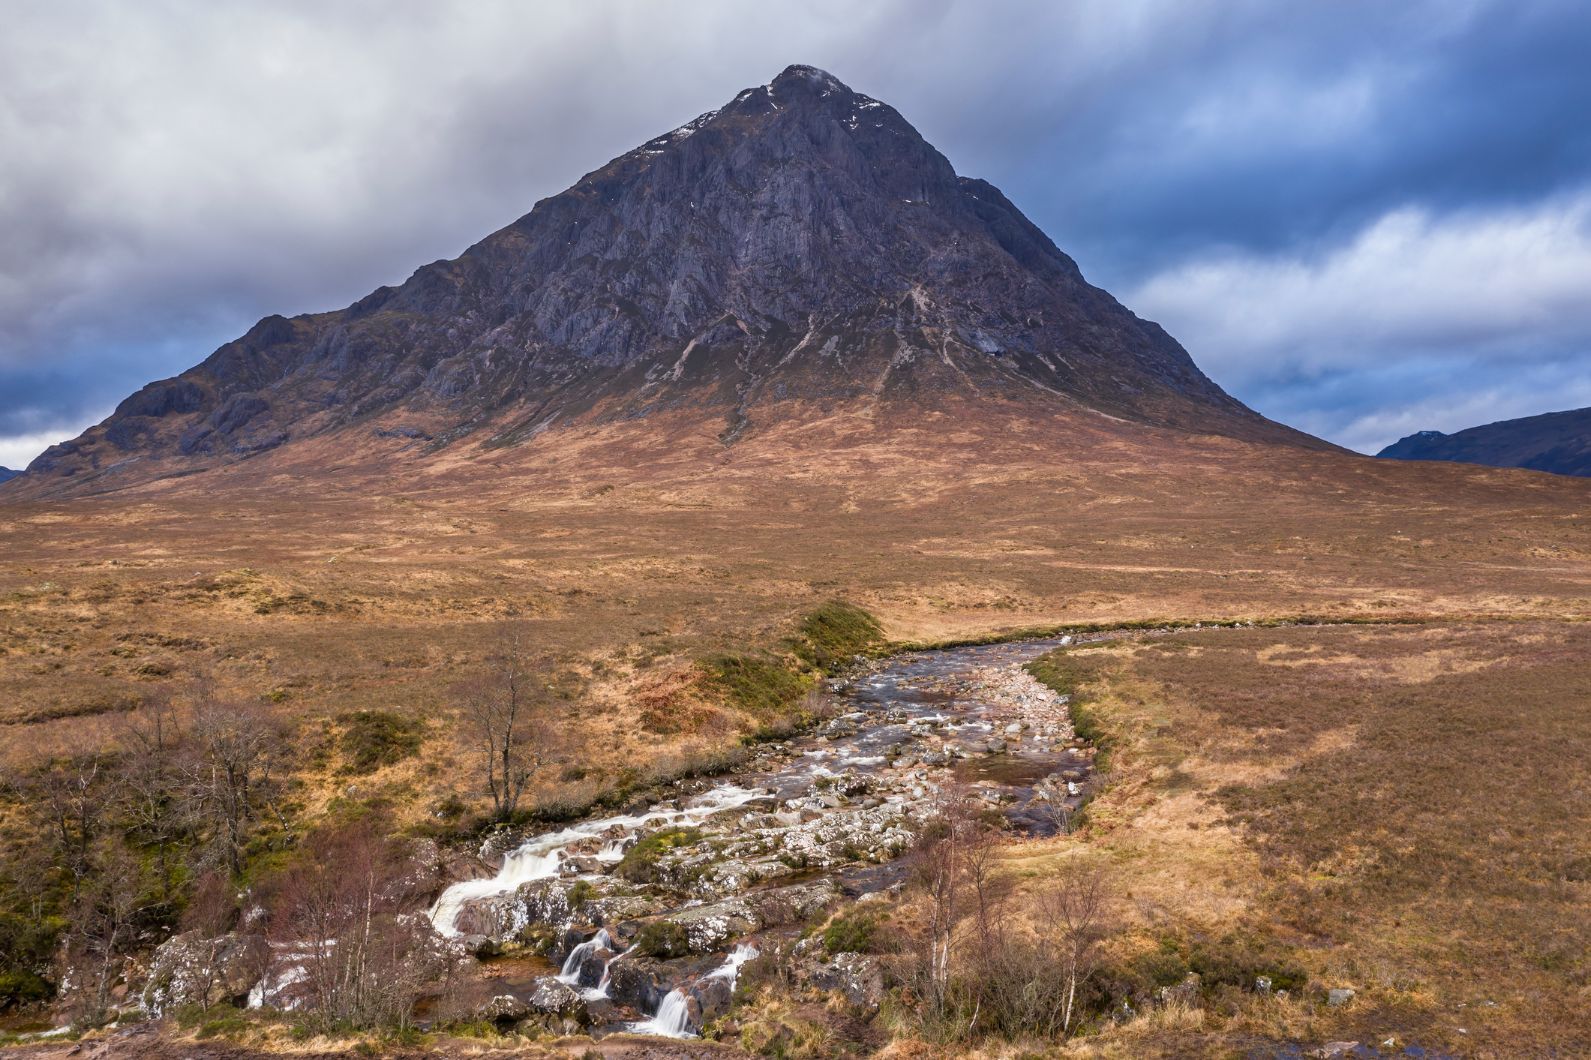 Buachaille Etive Mòr, one of the most iconic mountains in Scotland, found in Glencoe on the West Highland Way - one of the best hikes in the UK